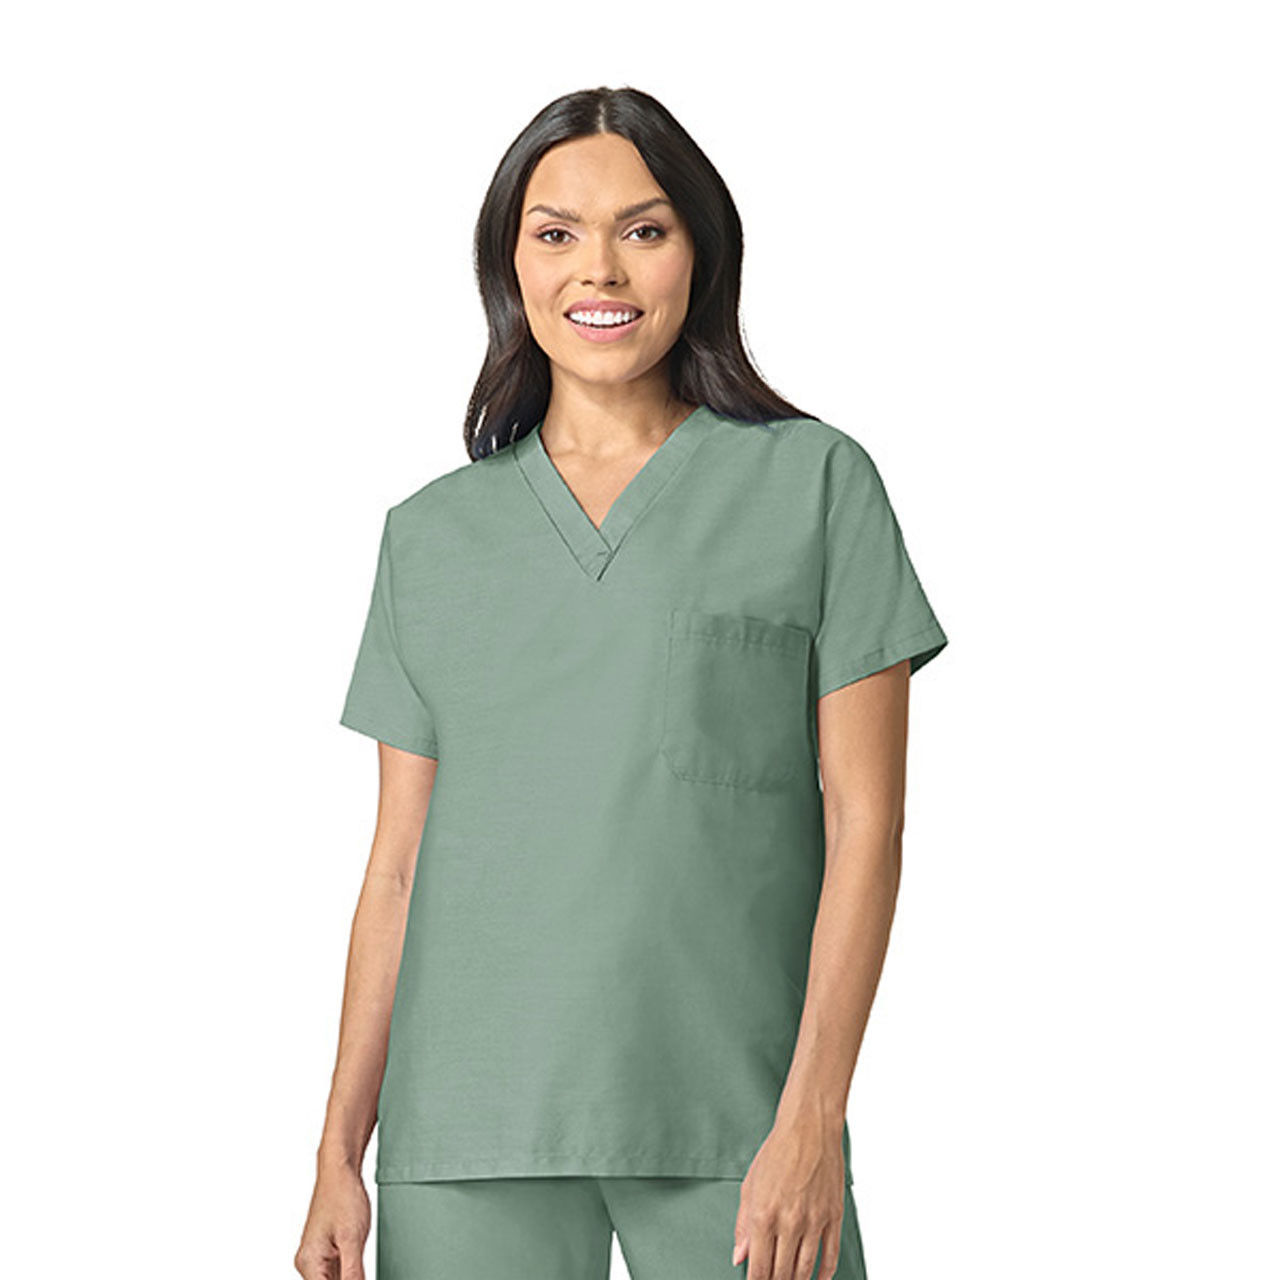 Does the sage green scrubs top have long or short sleeves?